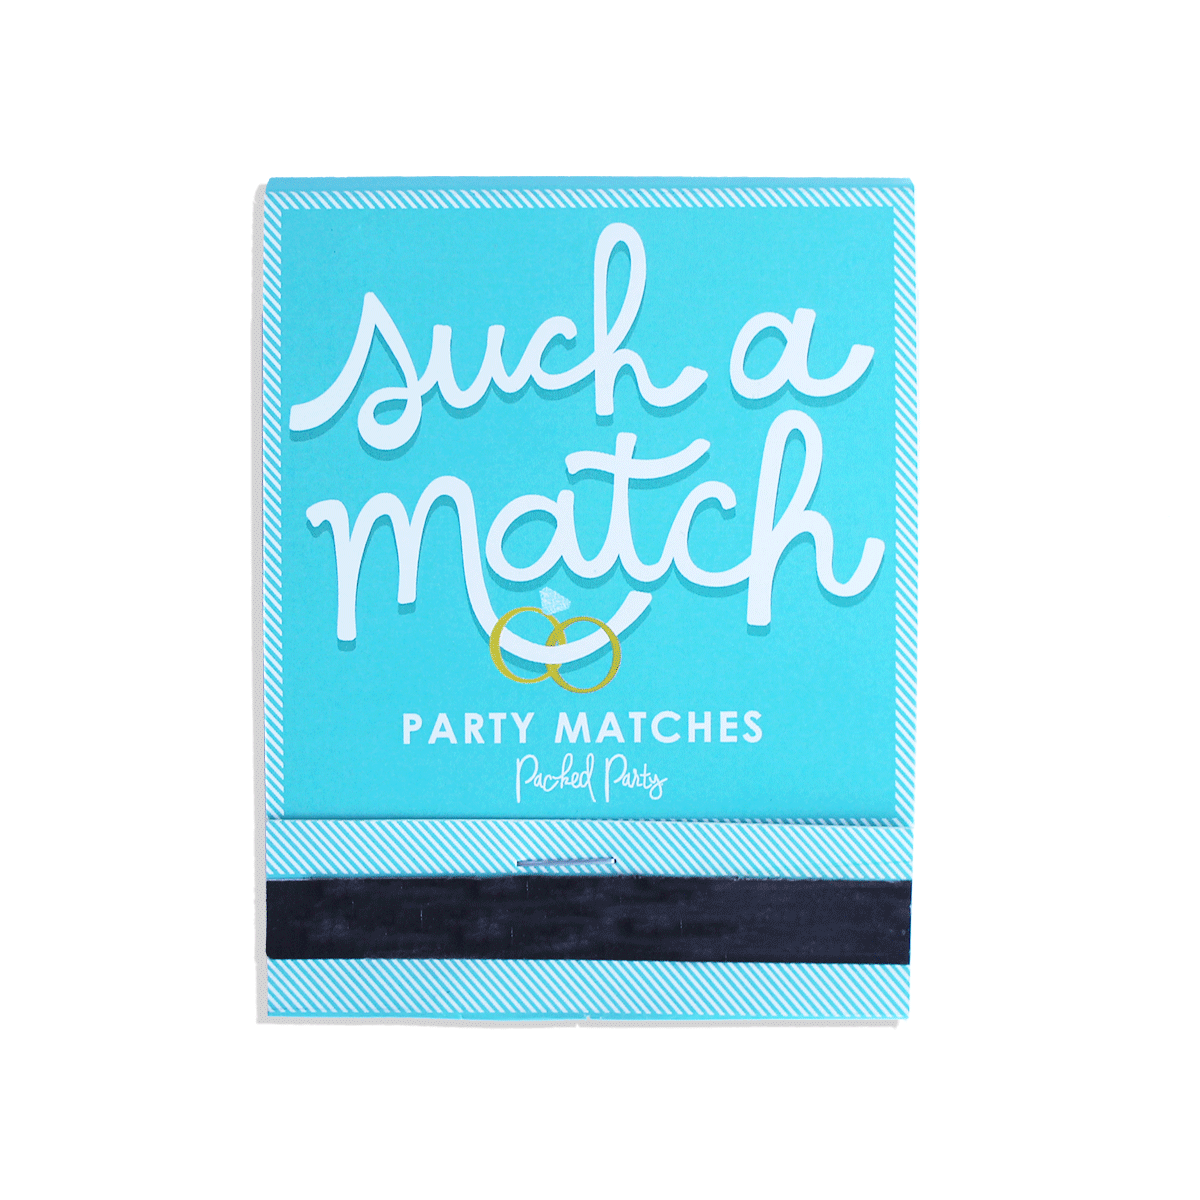 "Such a Match!" Party Matches